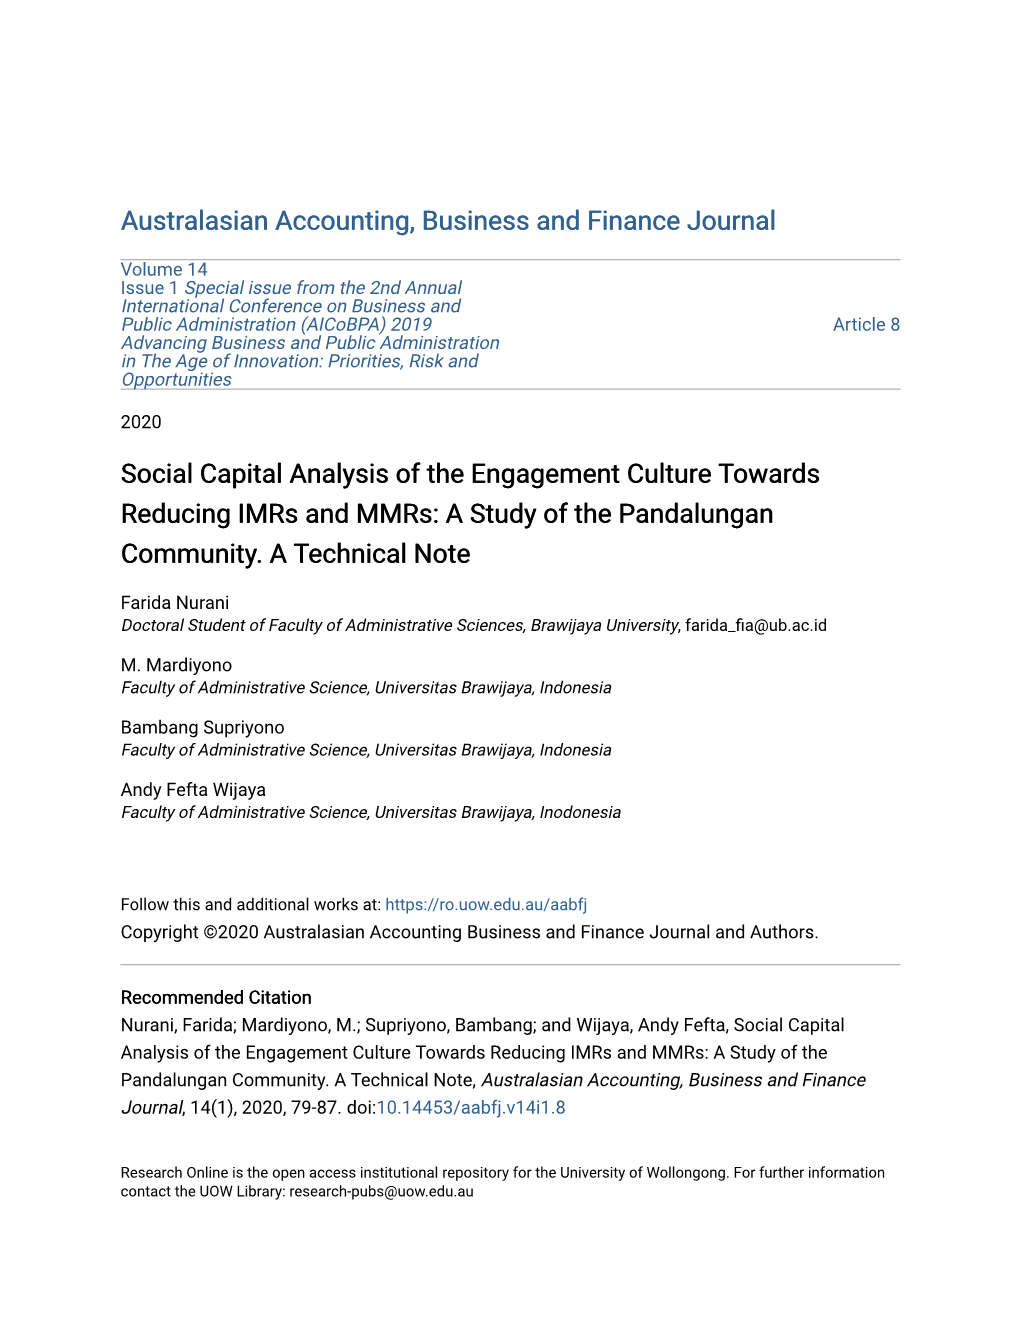 Social Capital Analysis of the Engagement Culture Towards Reducing Imrs and Mmrs: a Study of the Pandalungan Community